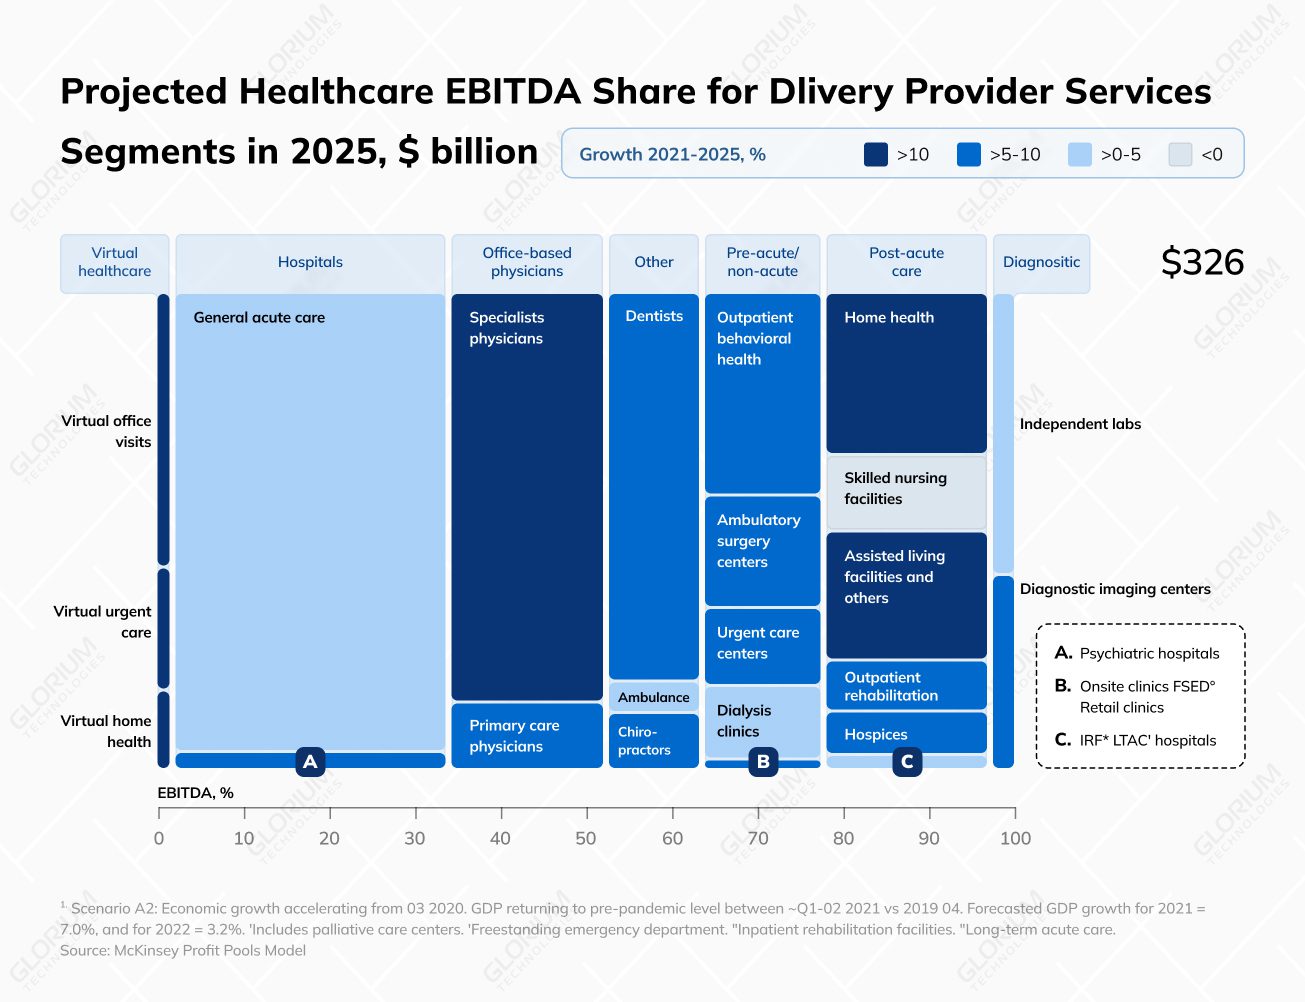 Projected Healthcare EBITDA Share for Dlivery Provider Services Segments in 2025, $ billion